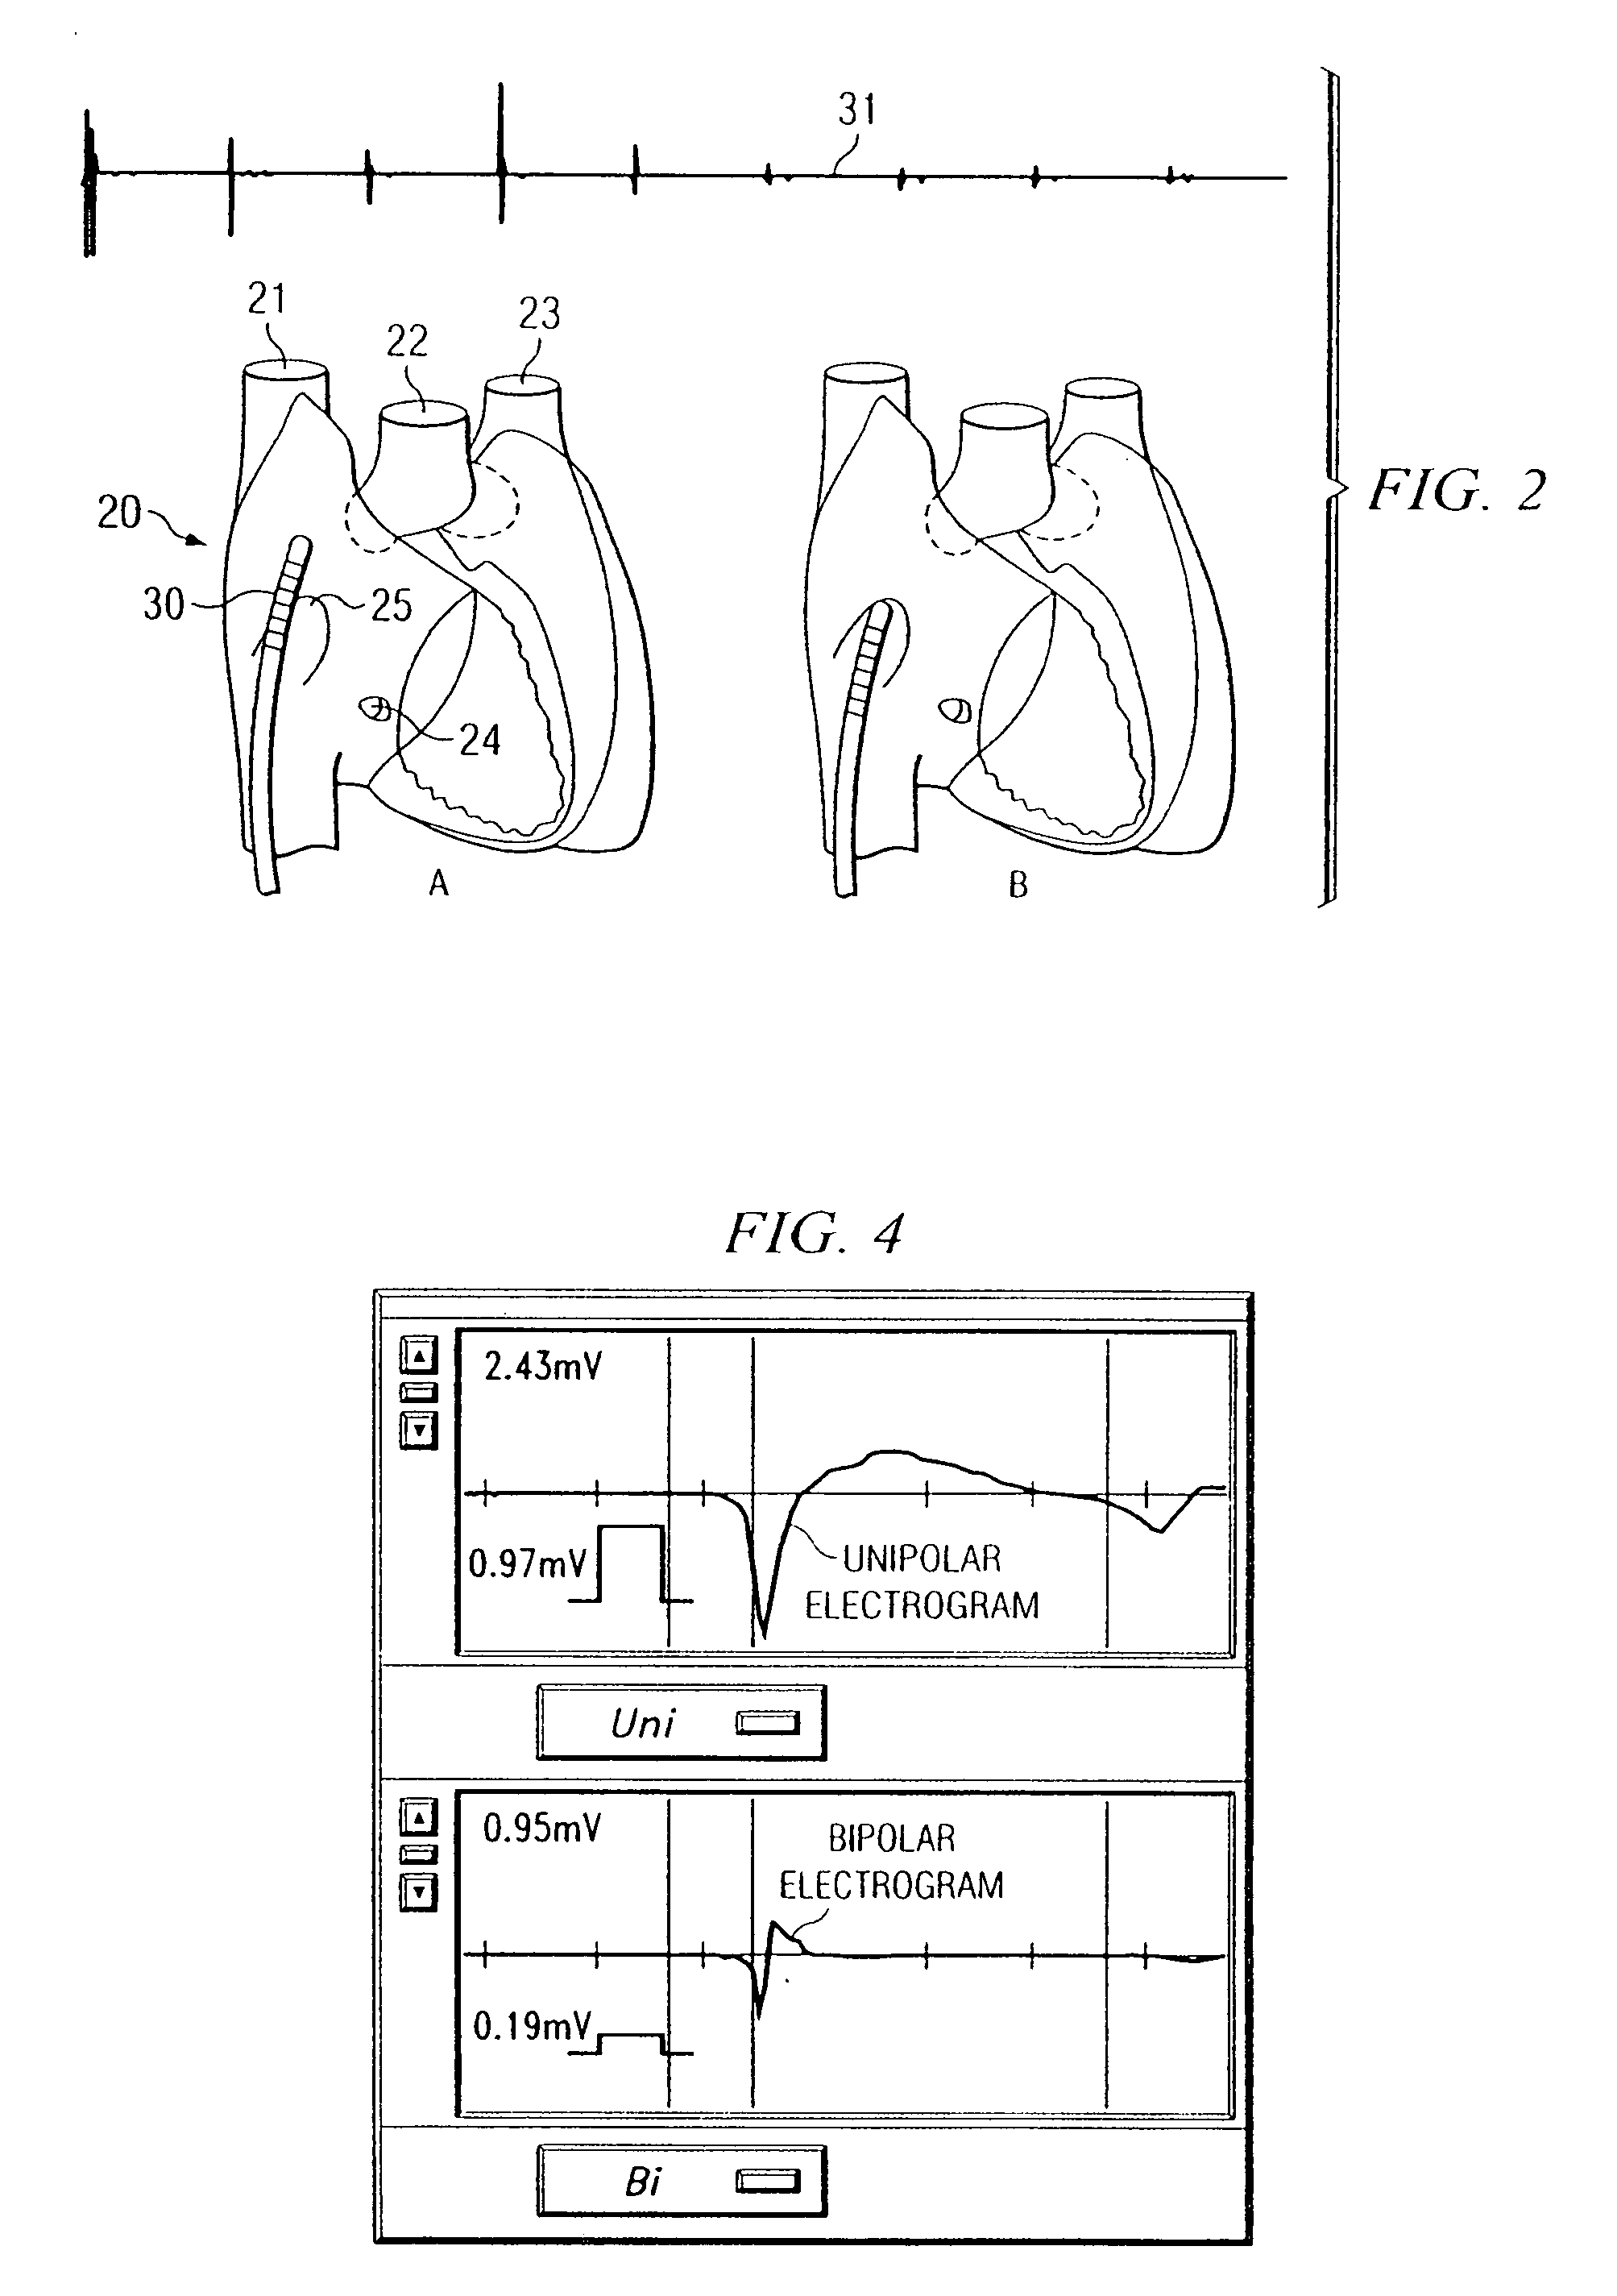 Method and apparatus for locating the fossa ovalis and performing transseptal puncture